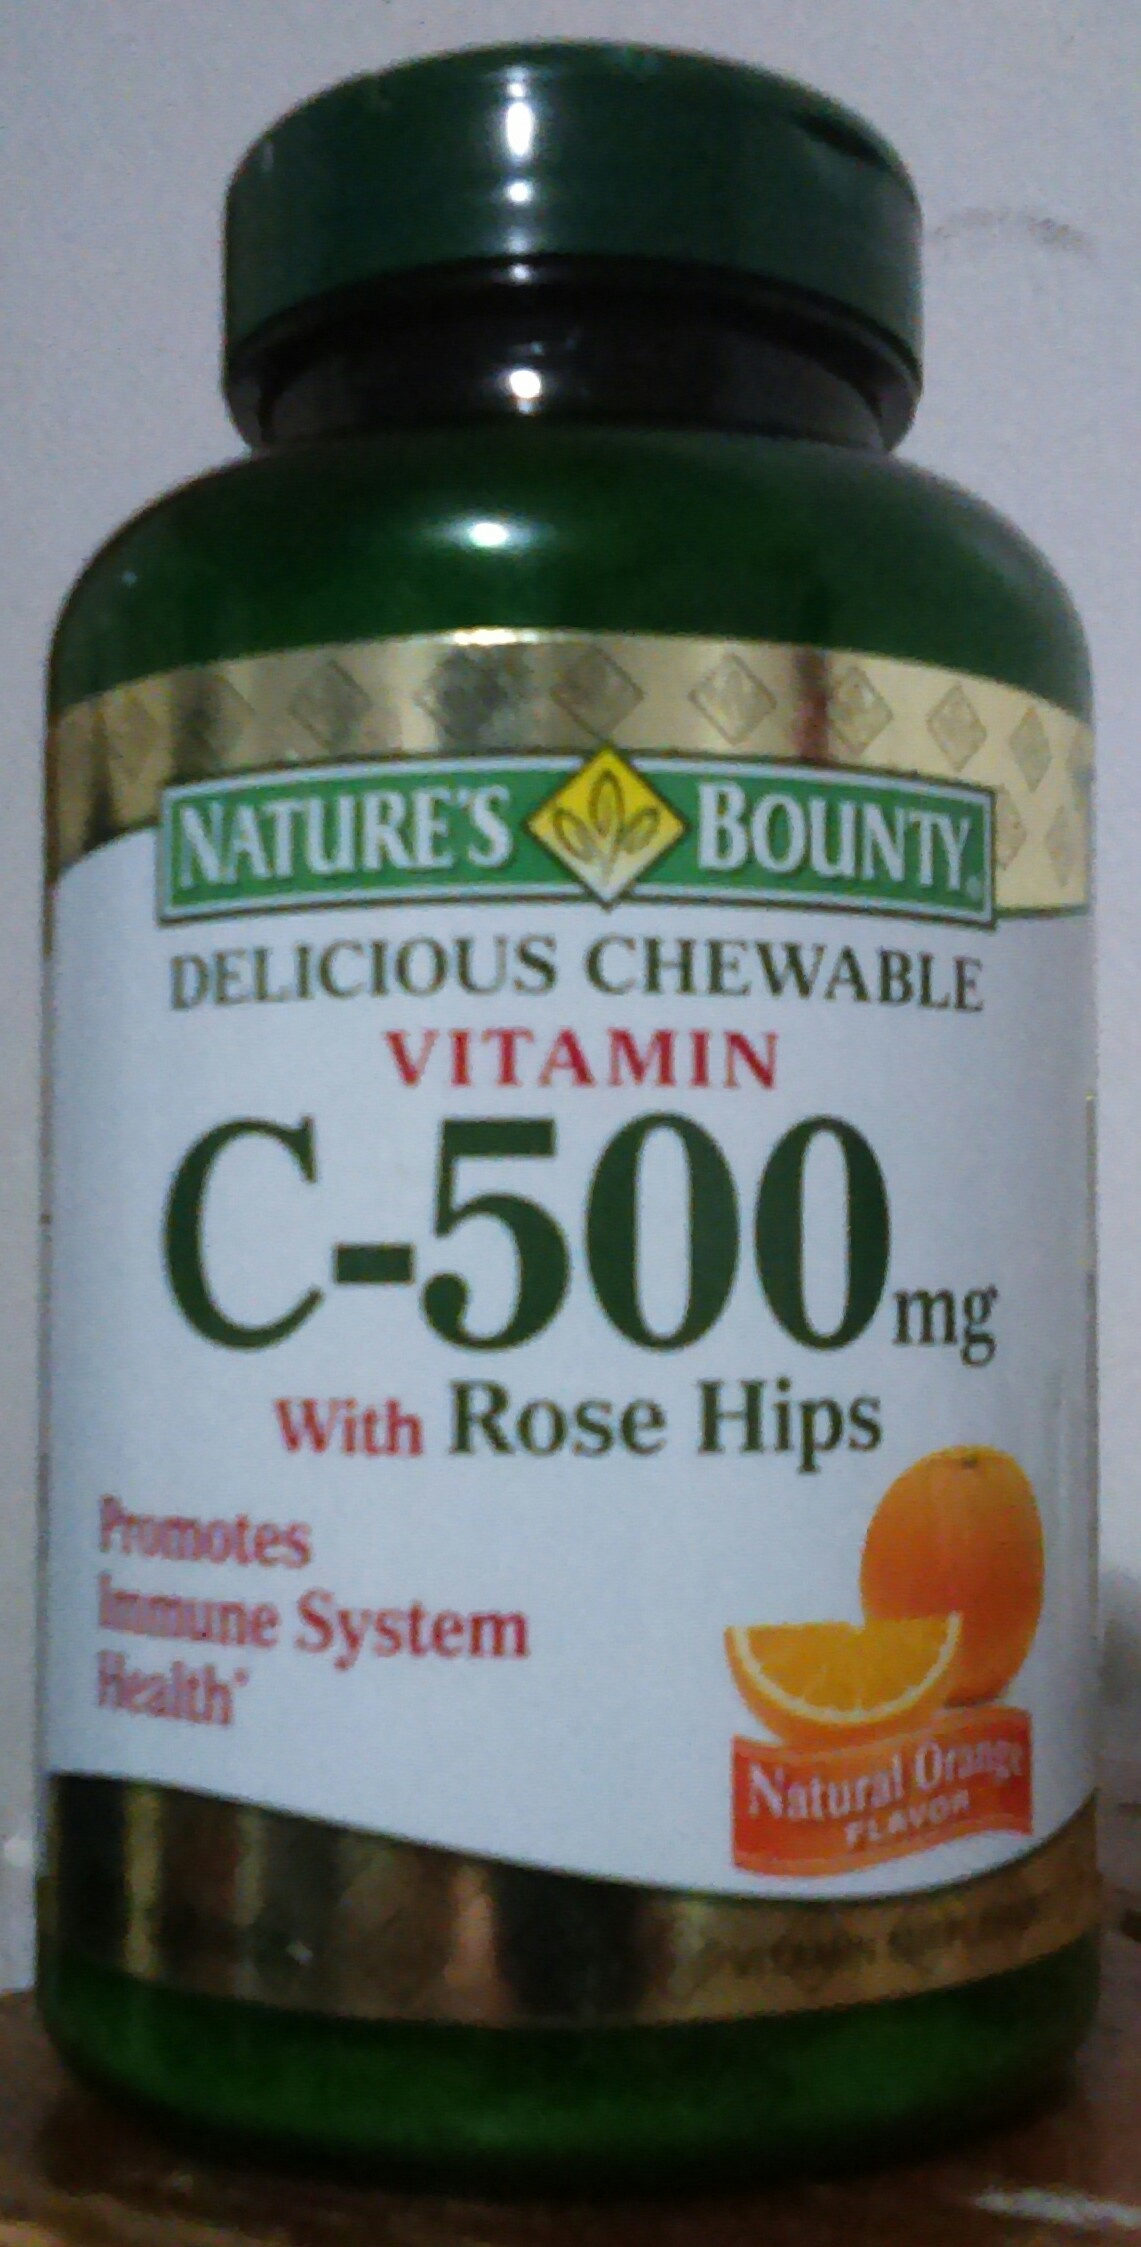 Delicious chewable vitamin C-500mg with rose hips - Product